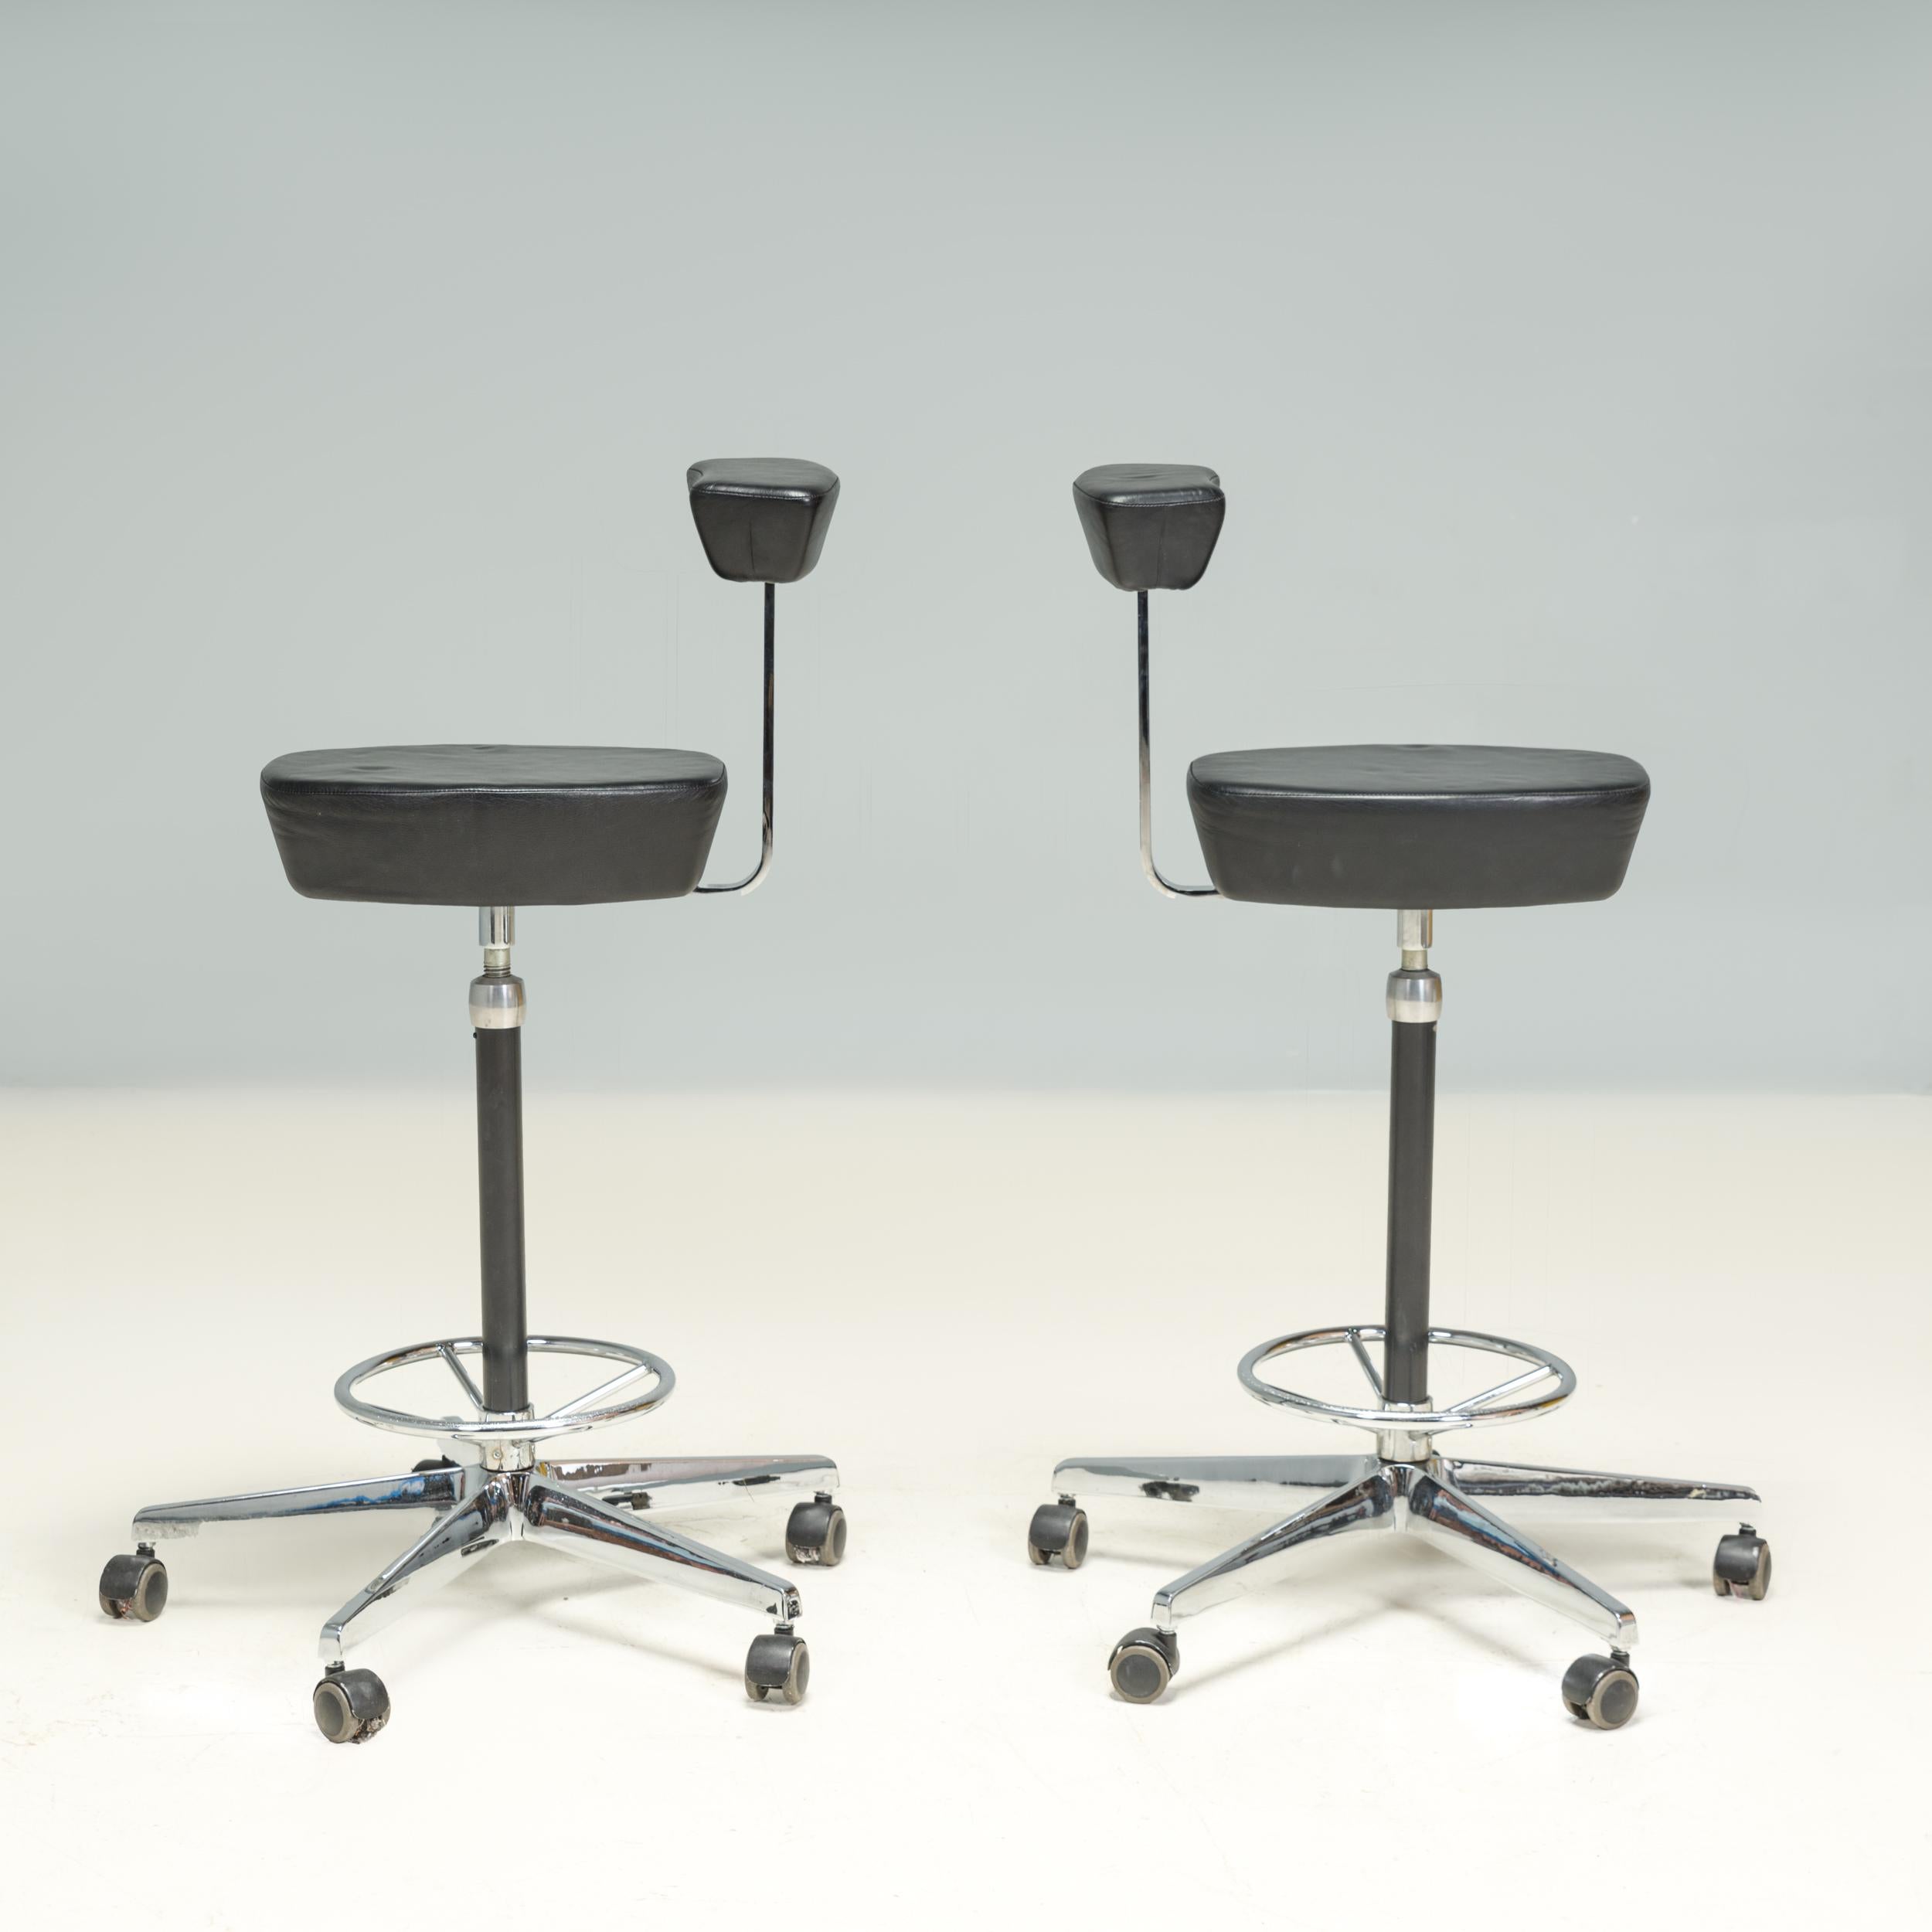 Originally designed by George Nelson in 1964 the Perch desk chair was part of the revolutionary Herman Miller Action 1 office system, which was the first open plan office design.

This pair of Perch desk chairs was manufactured by Vitra in 2001 and